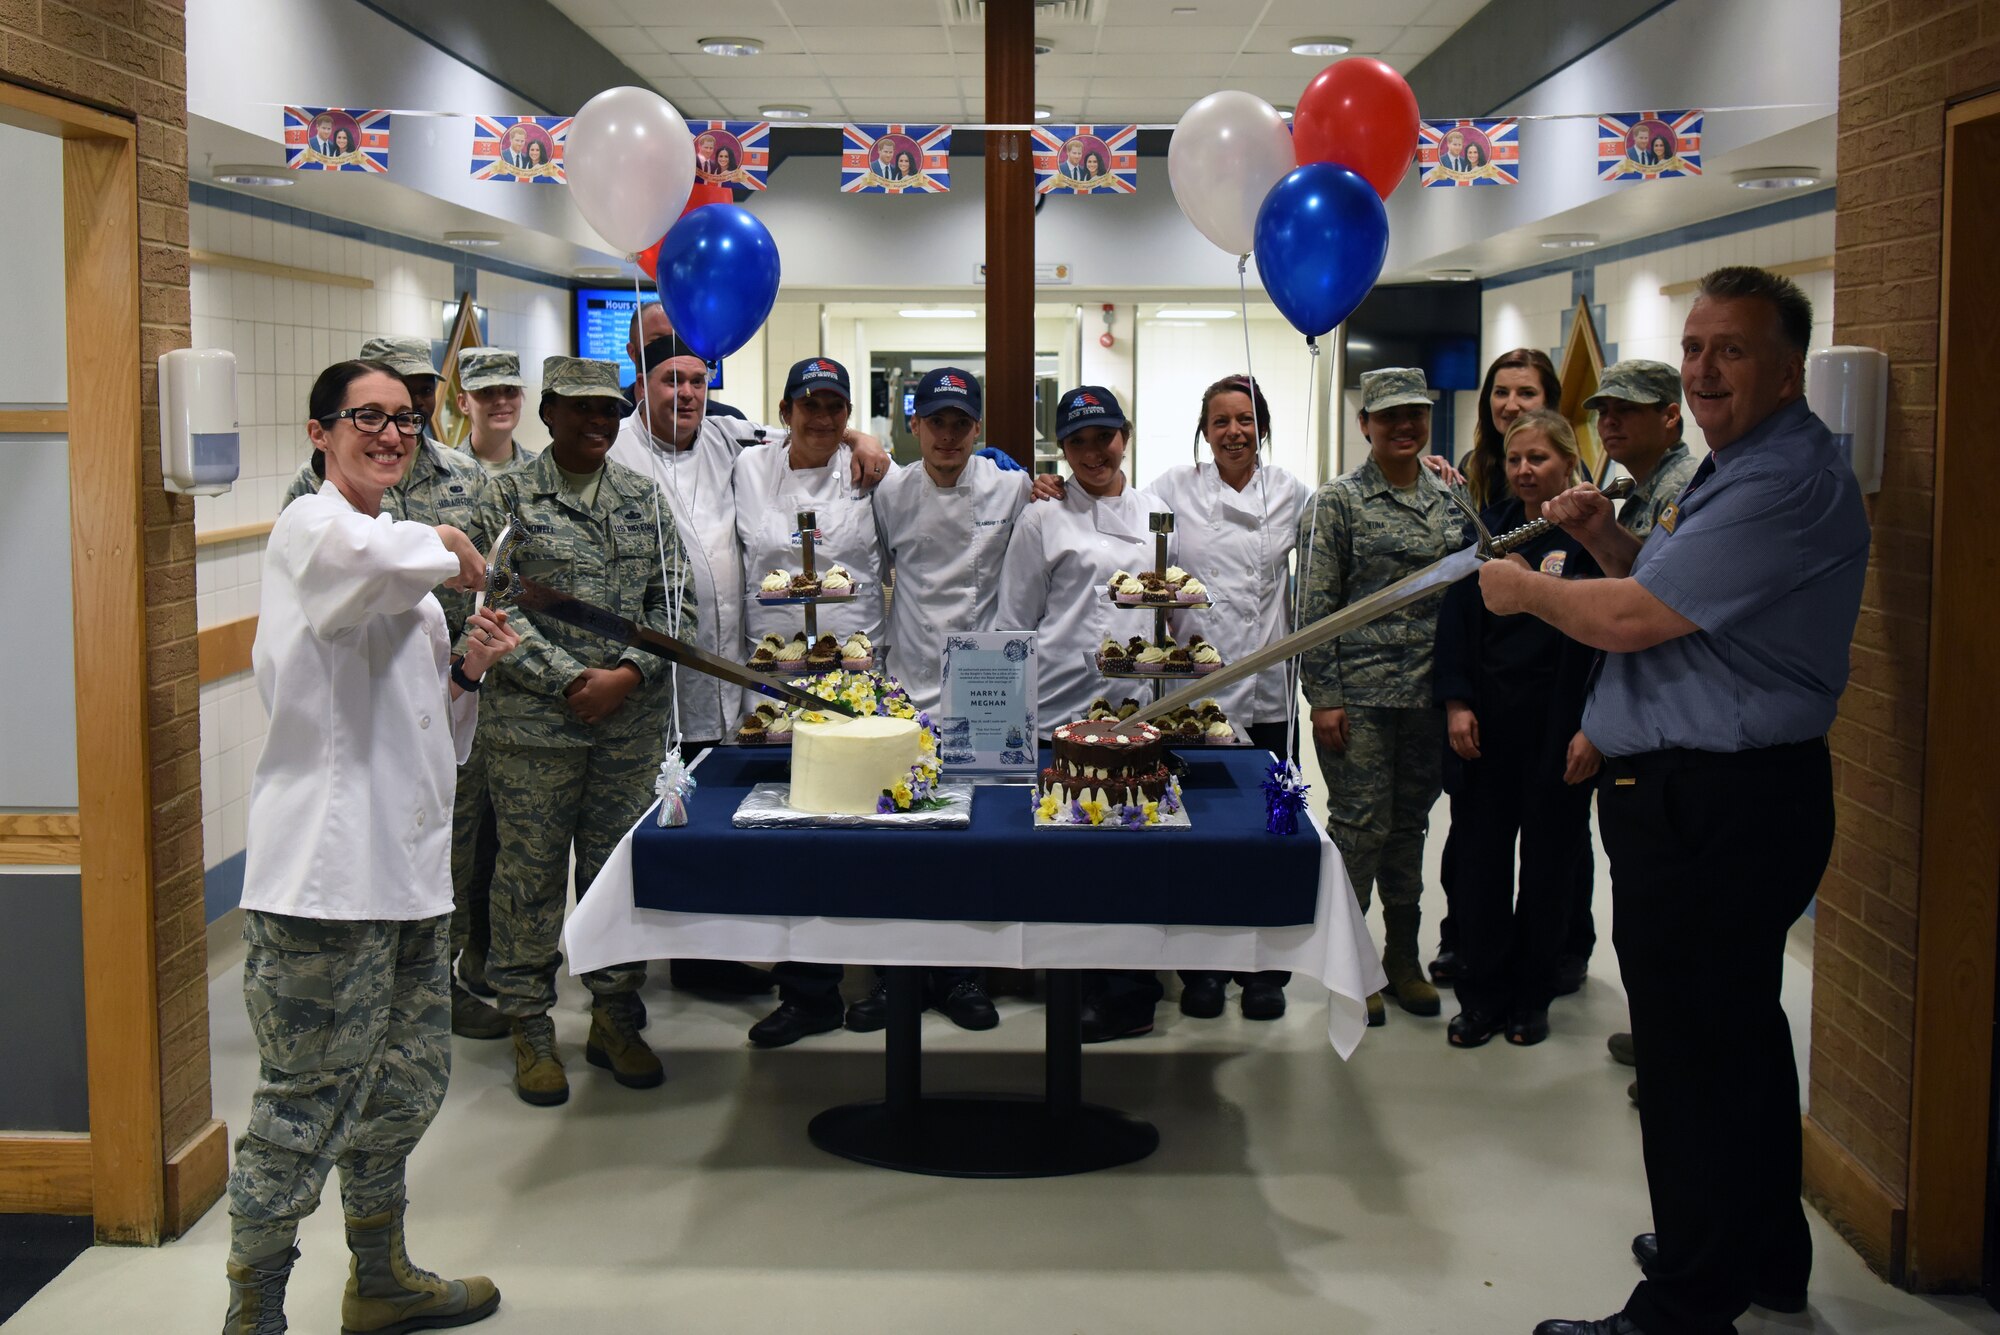 Lt. Col. Kelli R. Moon, commander of the 48th Force Support Squadron, and staff from the Knight's Table Dining Facility pose for a photo as part of the 48th Force Support Squadron's "You Got Served" events at Royal Air Force Lakenheath, England, May 18, 2018. The Knight's Table Dining Facility held a Royal Wedding cake cutting event for dining facility patrons. (U.S. Air Force Photo/ Airman 1st Class John A. Crawford)